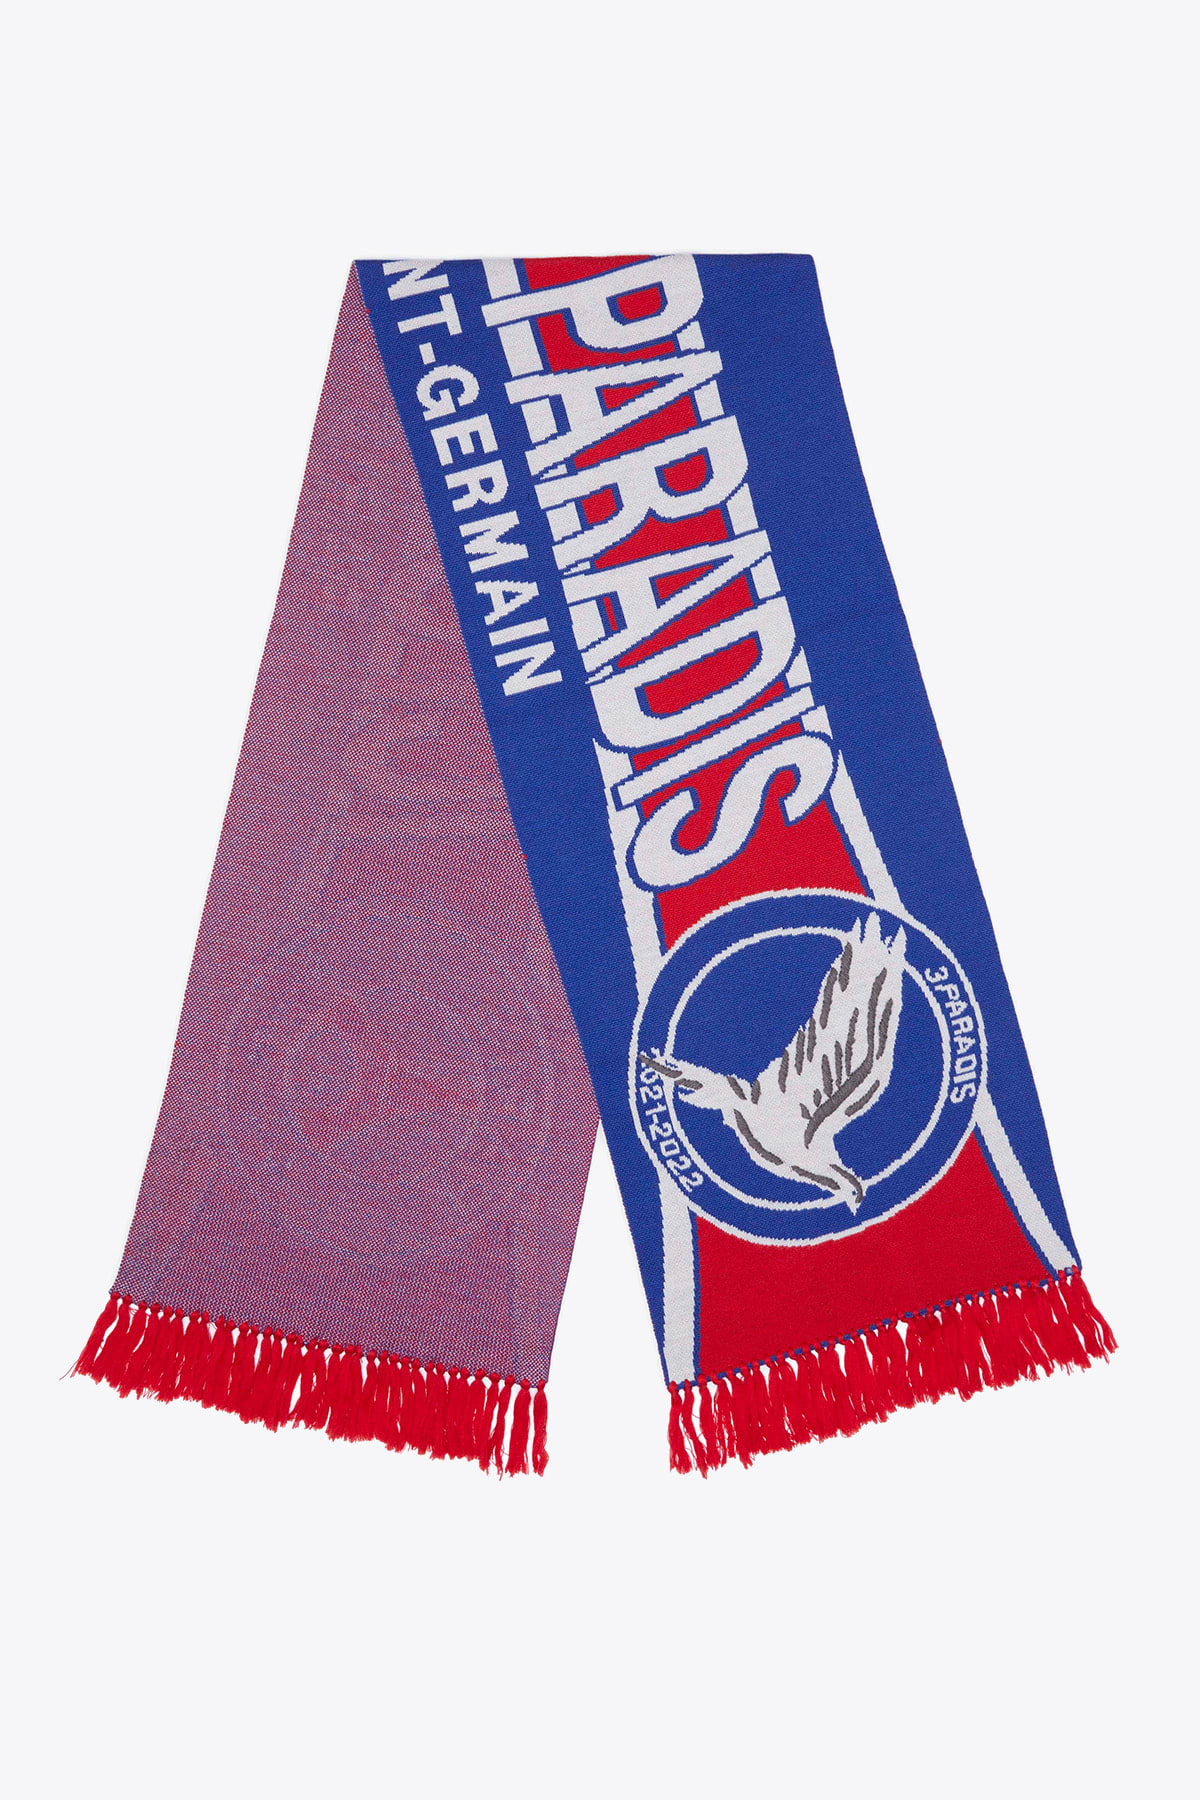 3.Paradis Home Oversized Scarf PSG collab scarf with slogan - Home oversized scarf